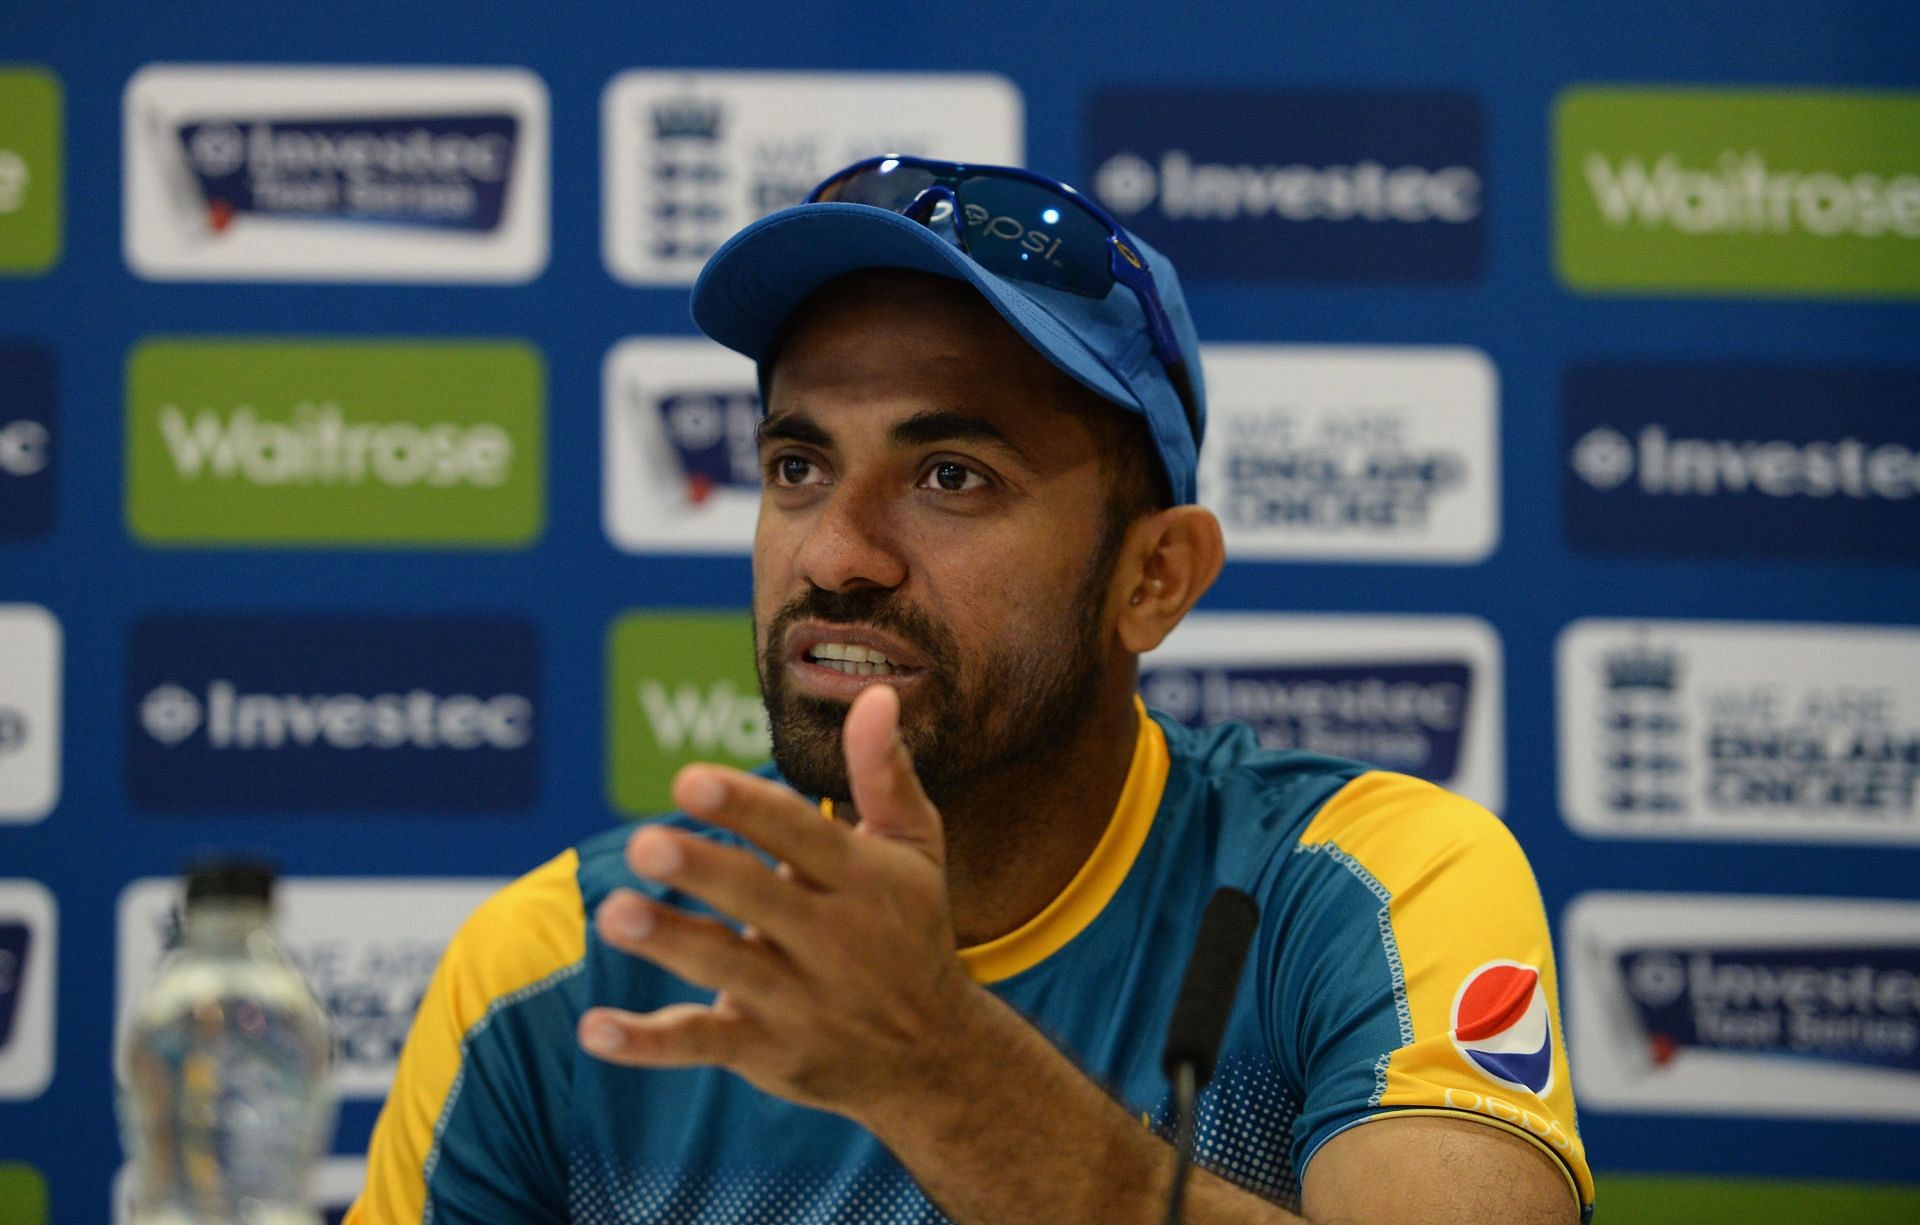 “Not right to sideline players calling them over-aged” – Wahab Riaz